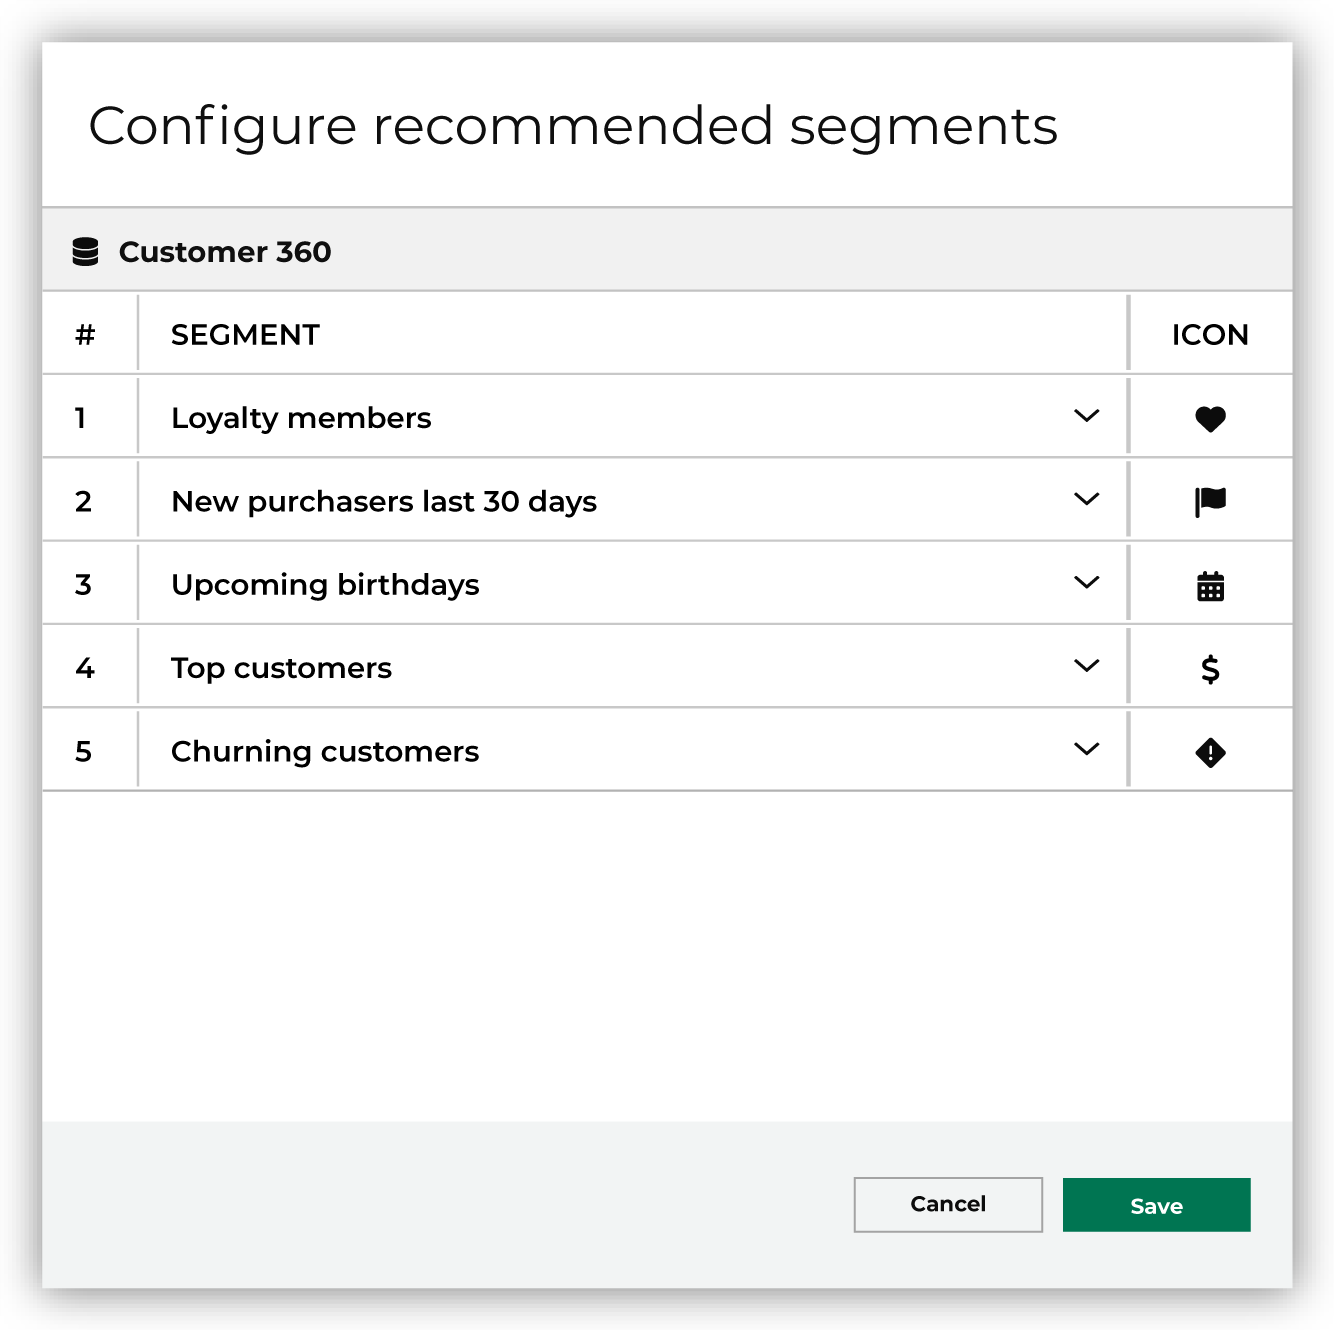 Configure recommended segments.